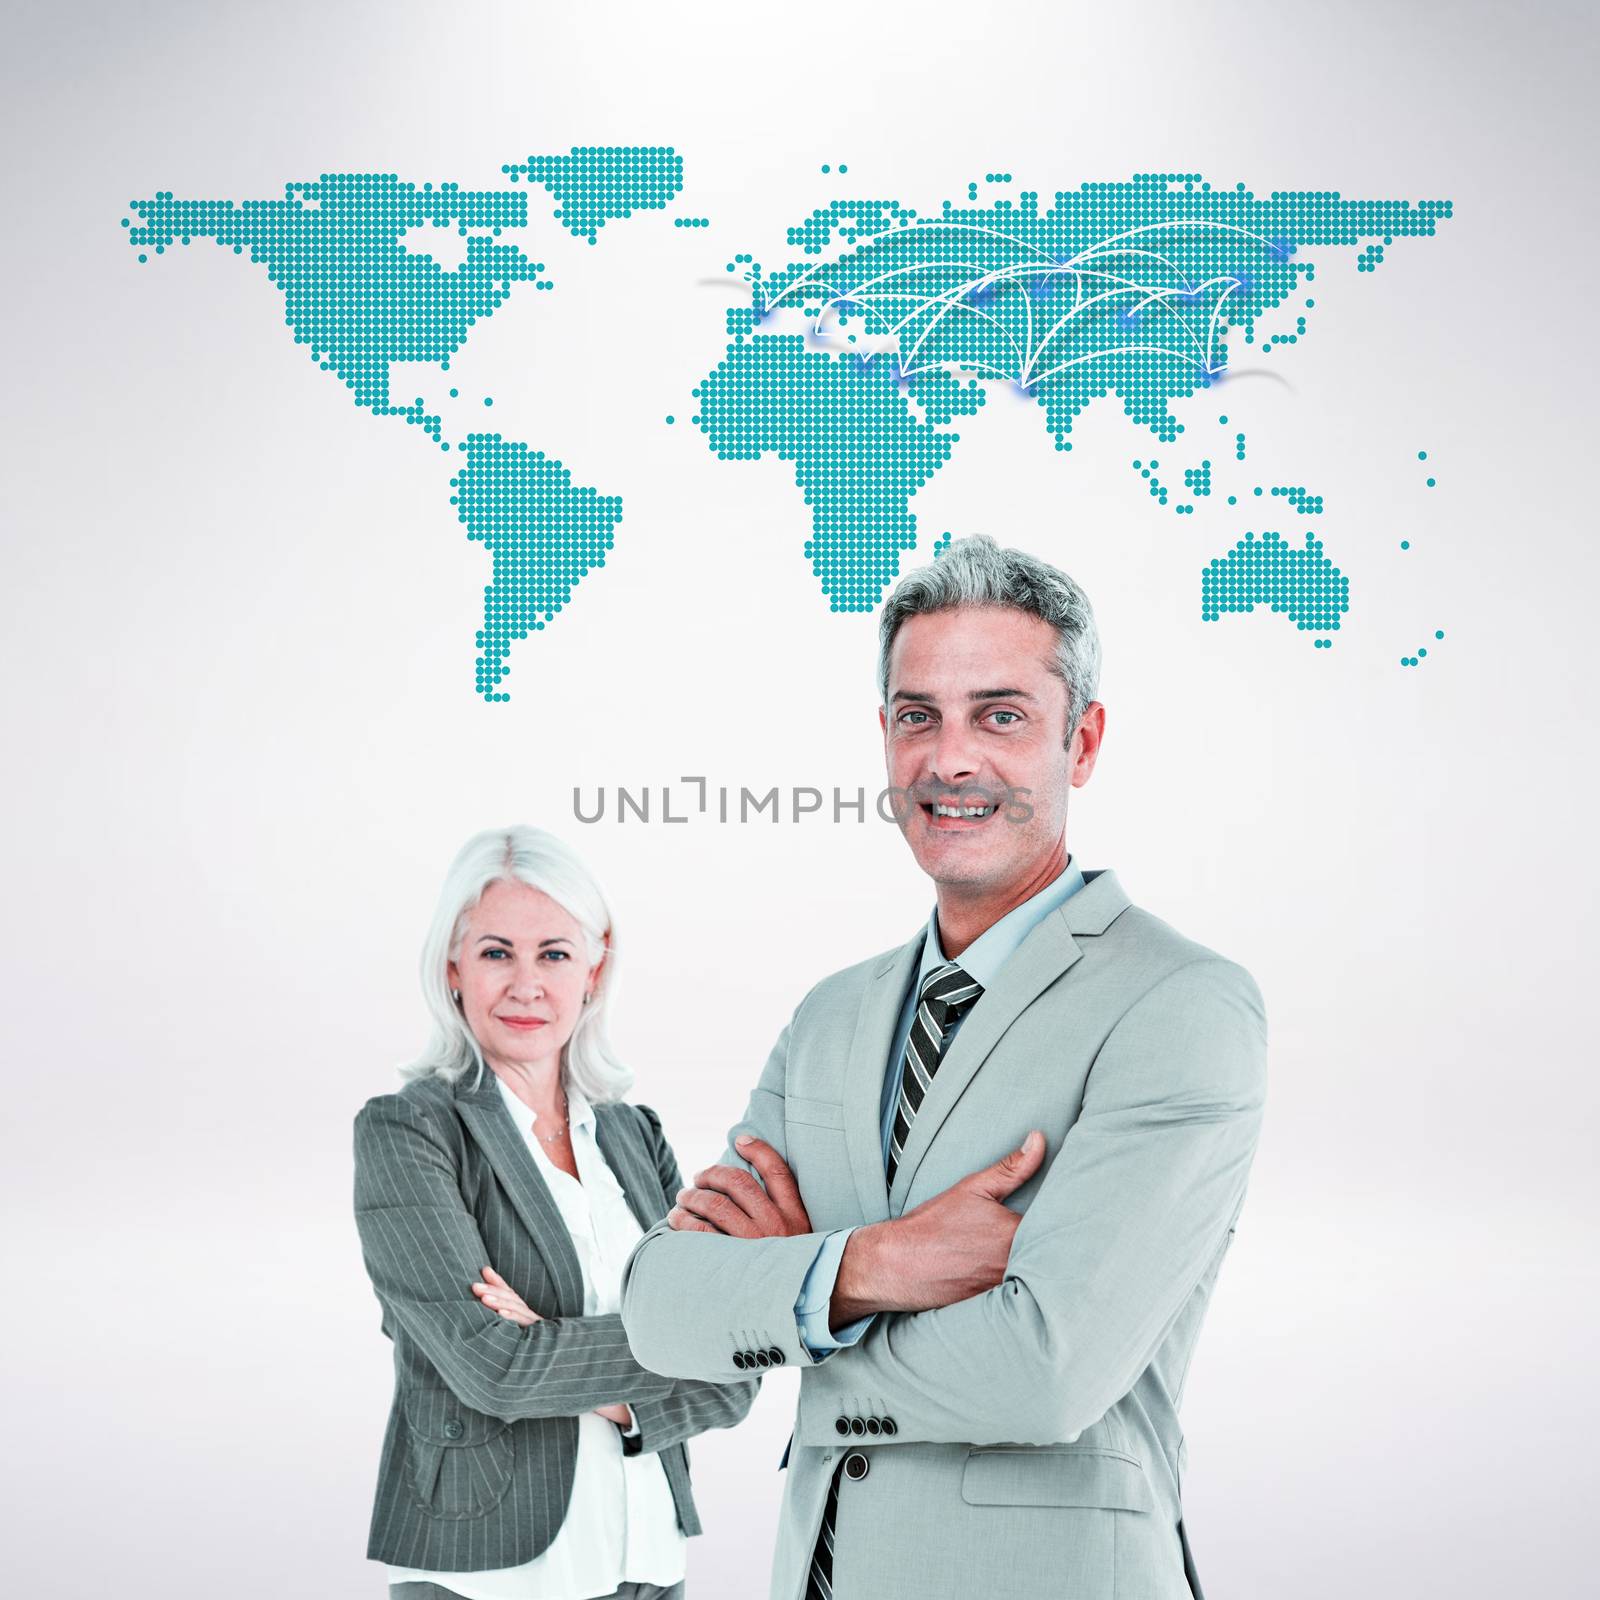 Composite image of  smiling businesswoman and man with arms crossed by Wavebreakmedia